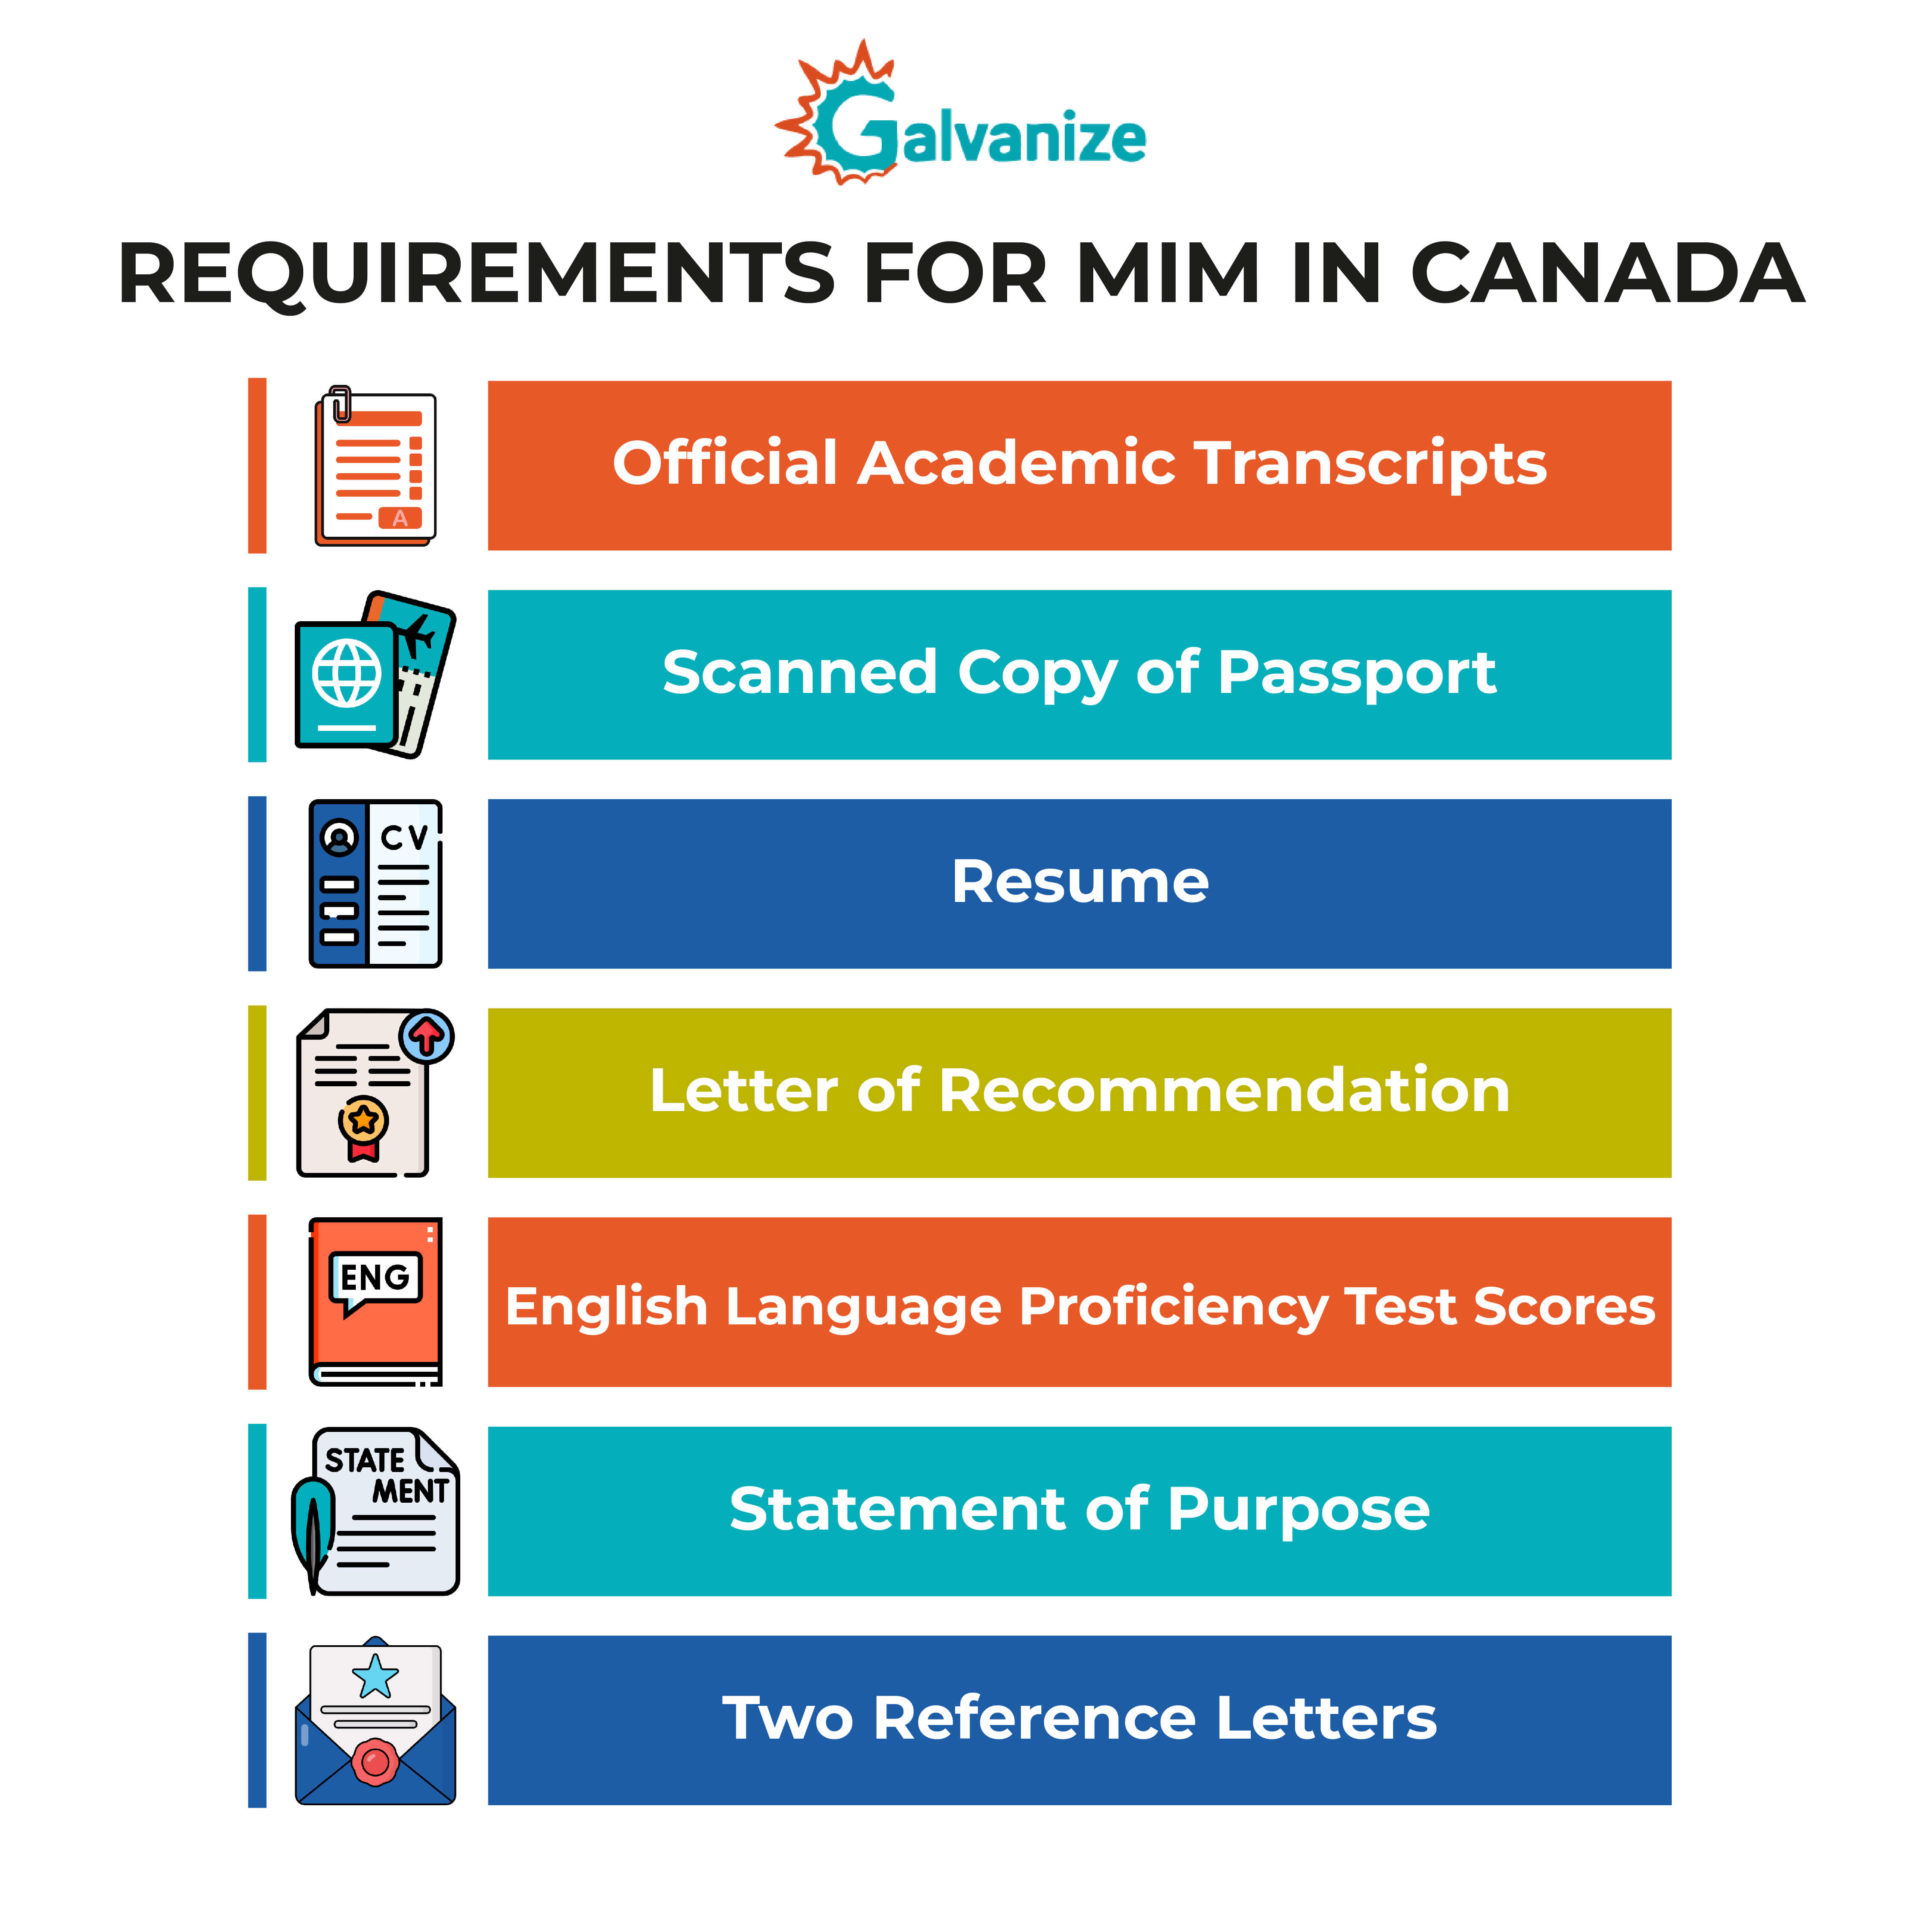 Requirements for MIM in Canada